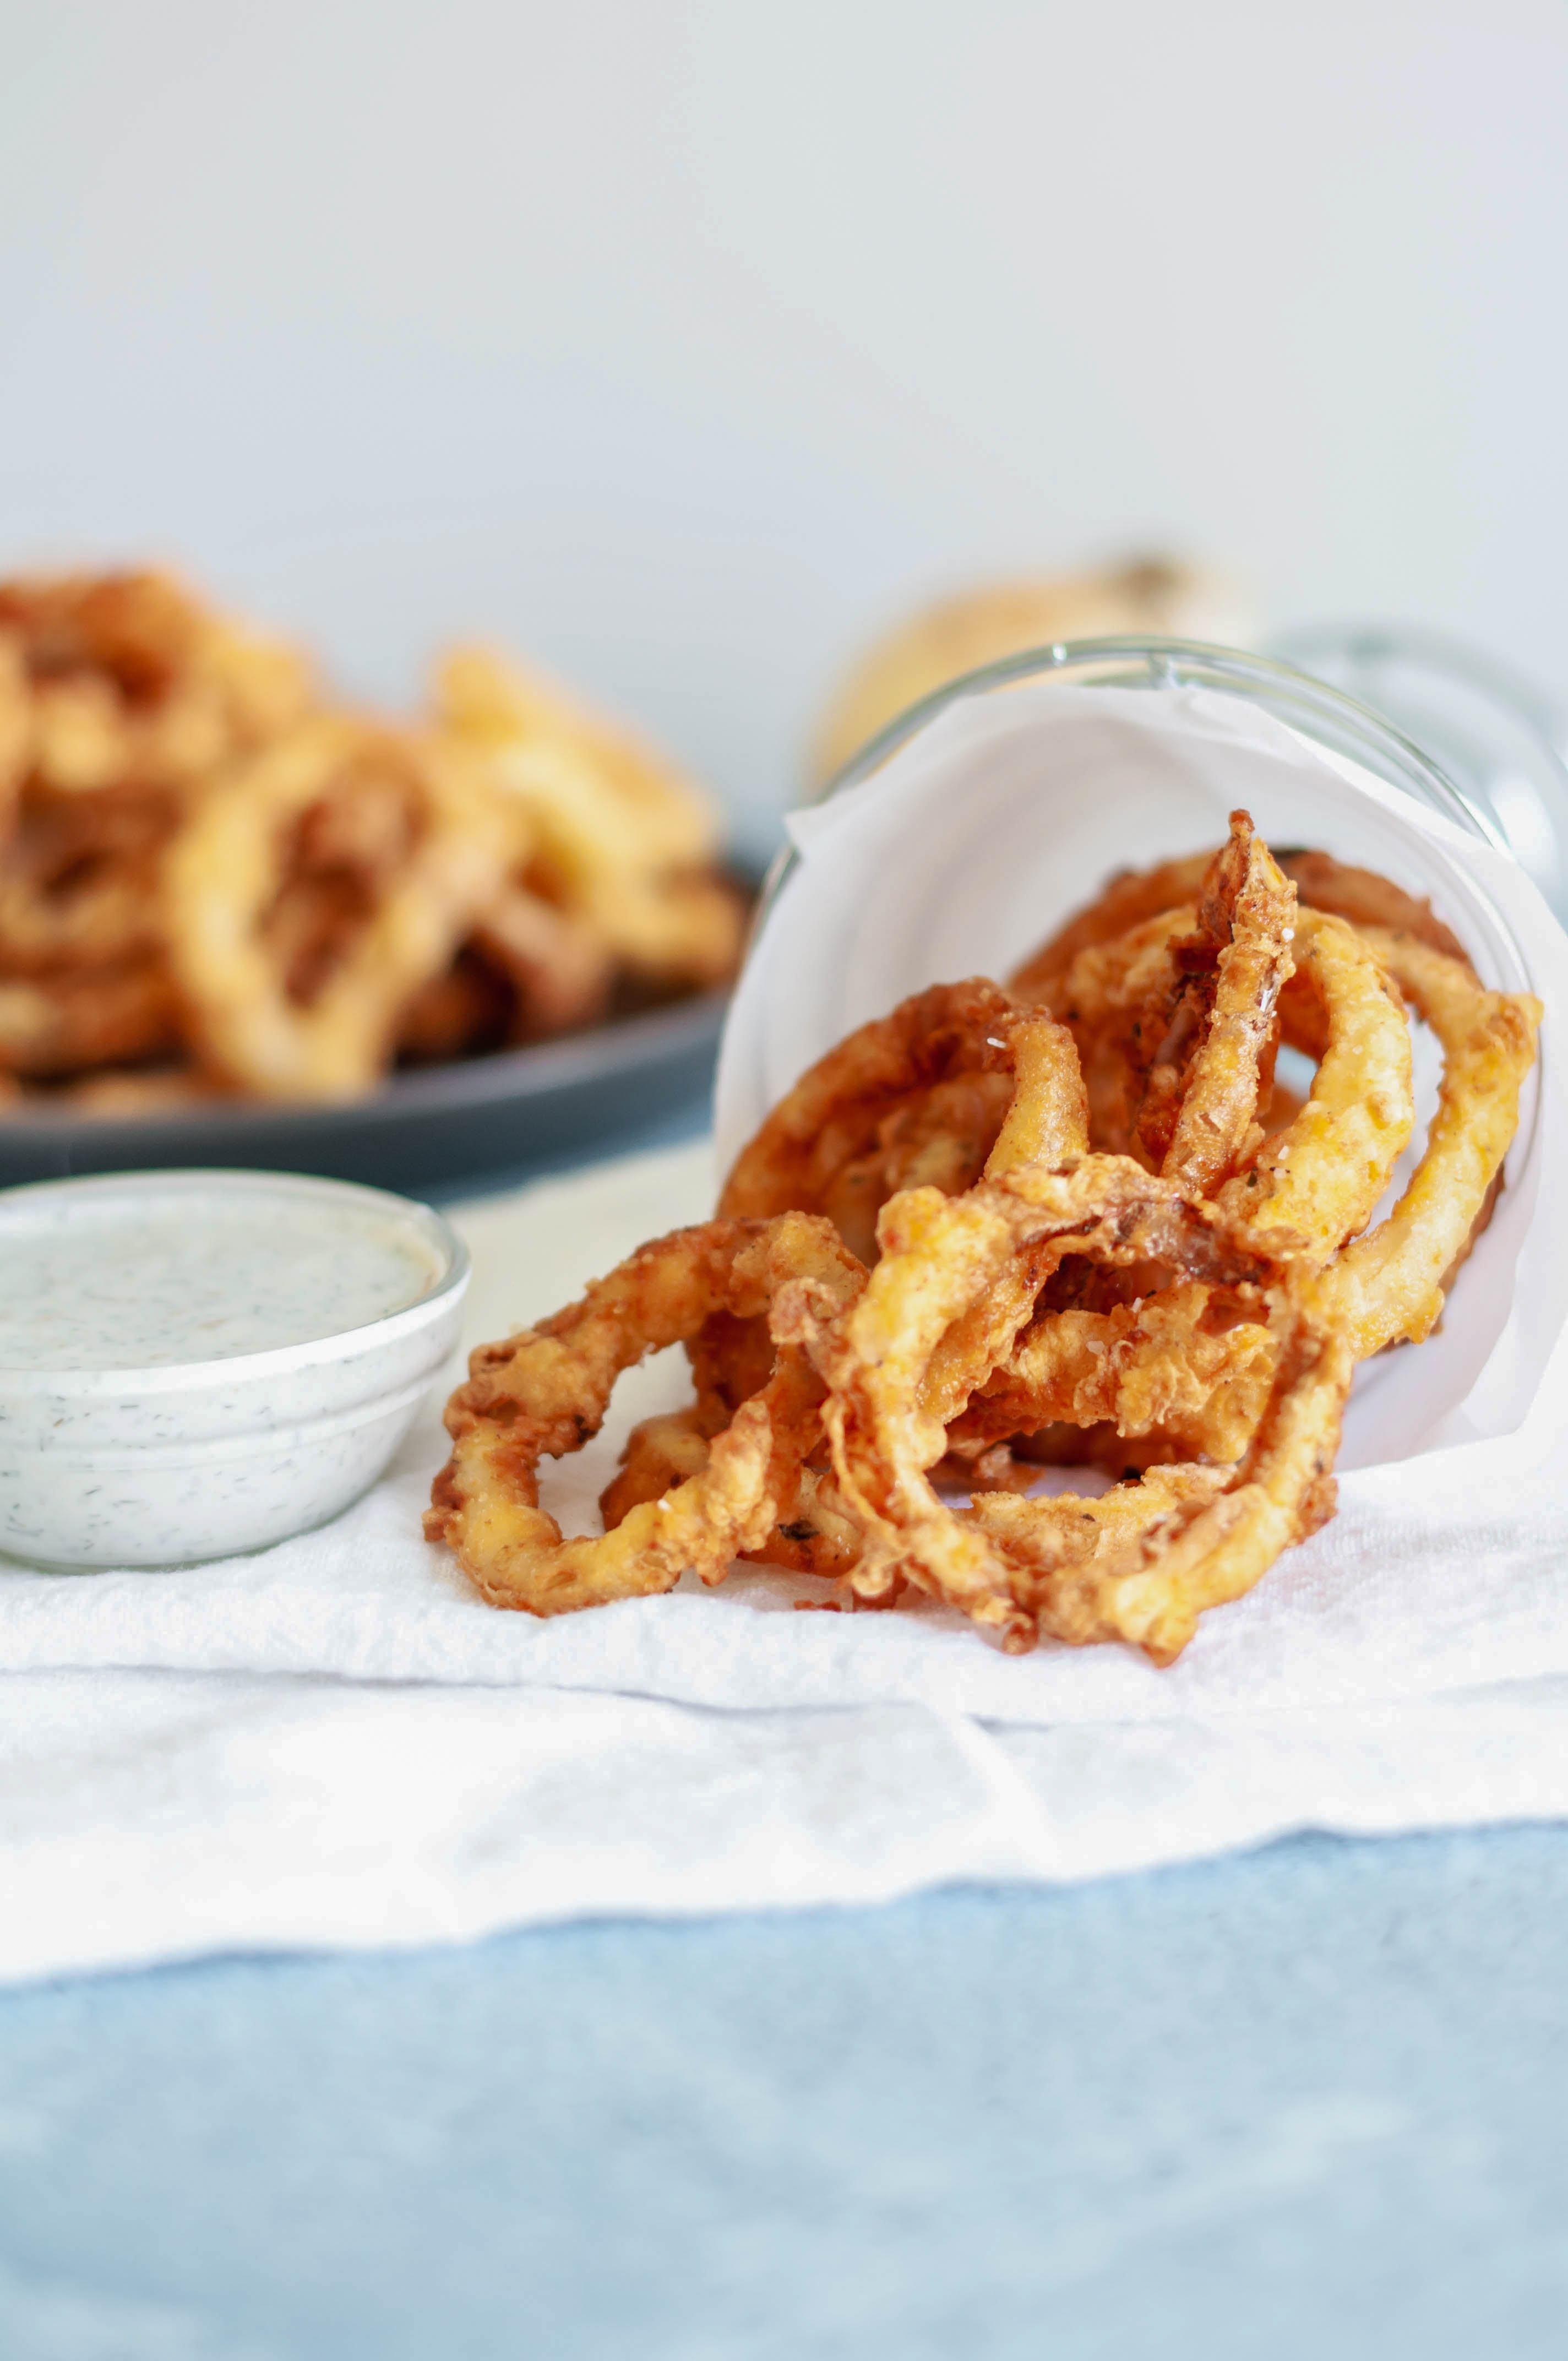 These Crispy Onion Rings with Buttermilk Dill Dressing will be the hit of the party. Perfect for appetizers, game day or to go with your burgers.